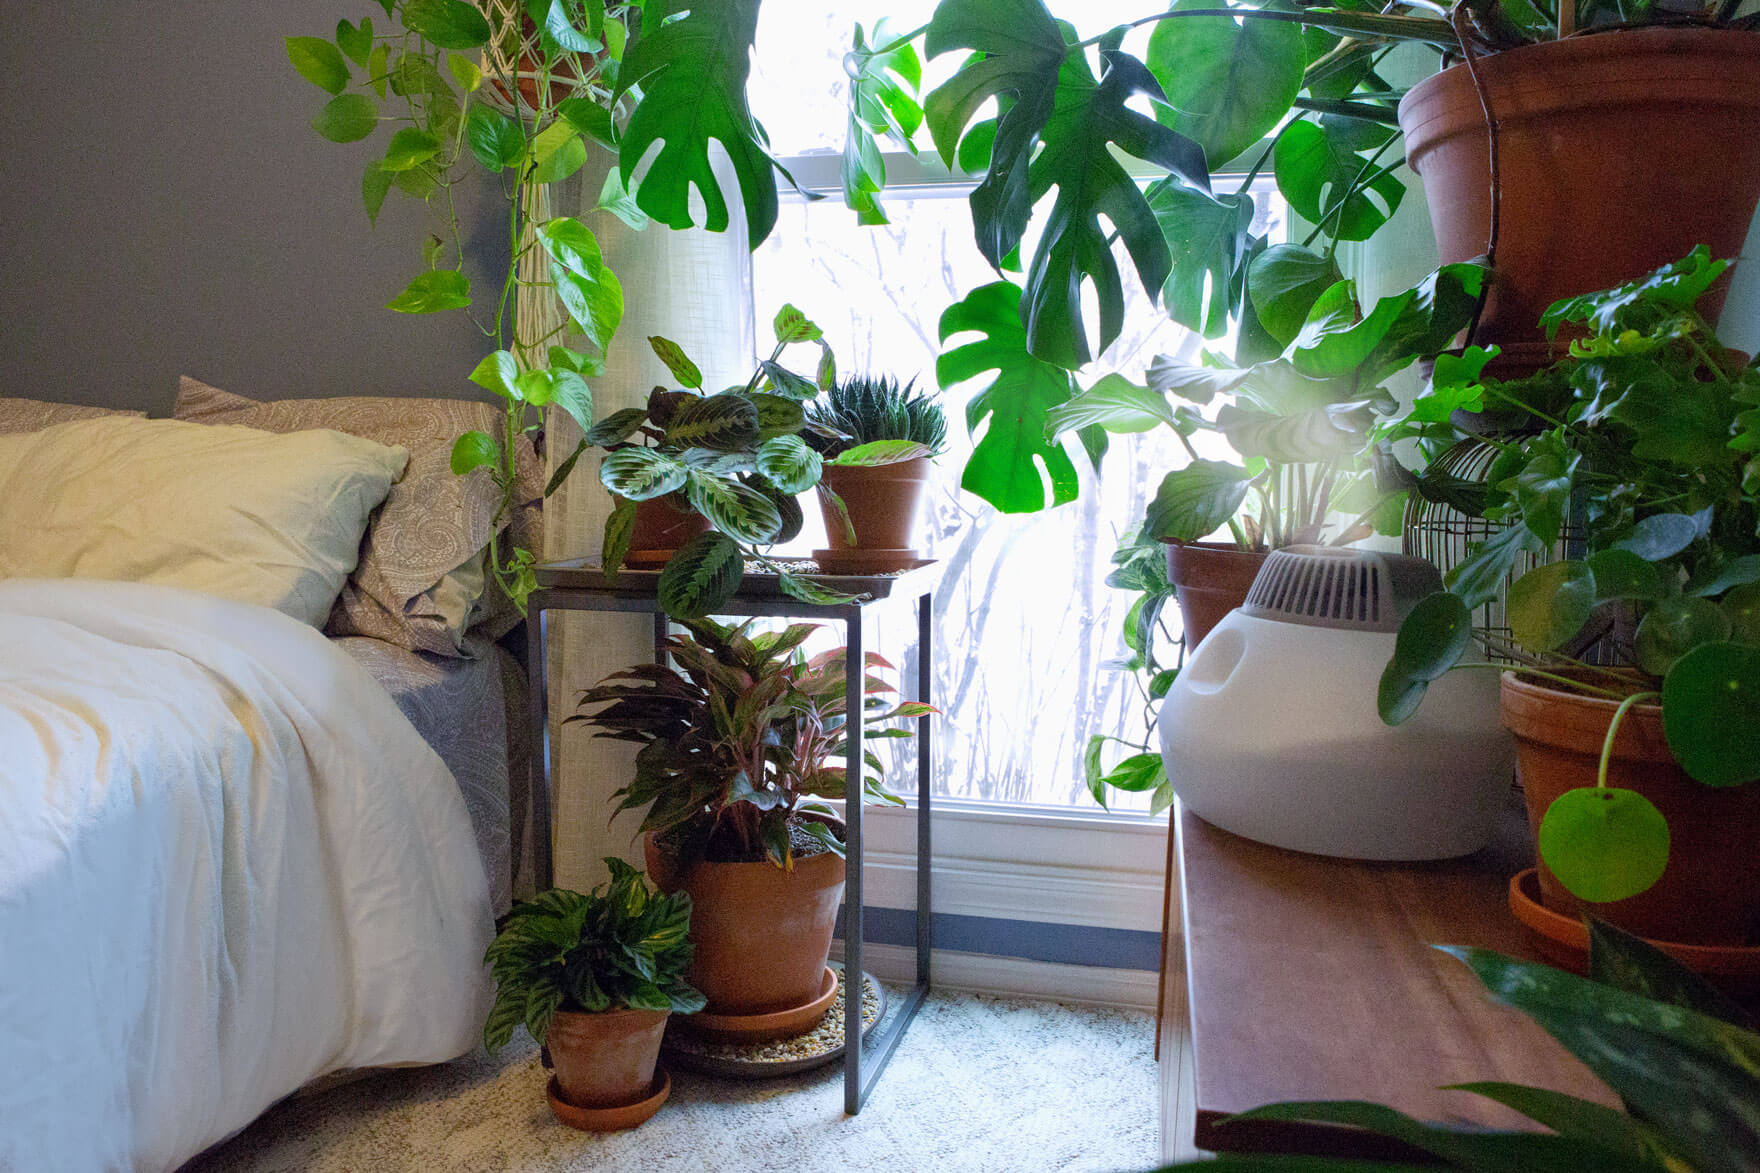 How to increase humidity for houseplants (without a humidifier